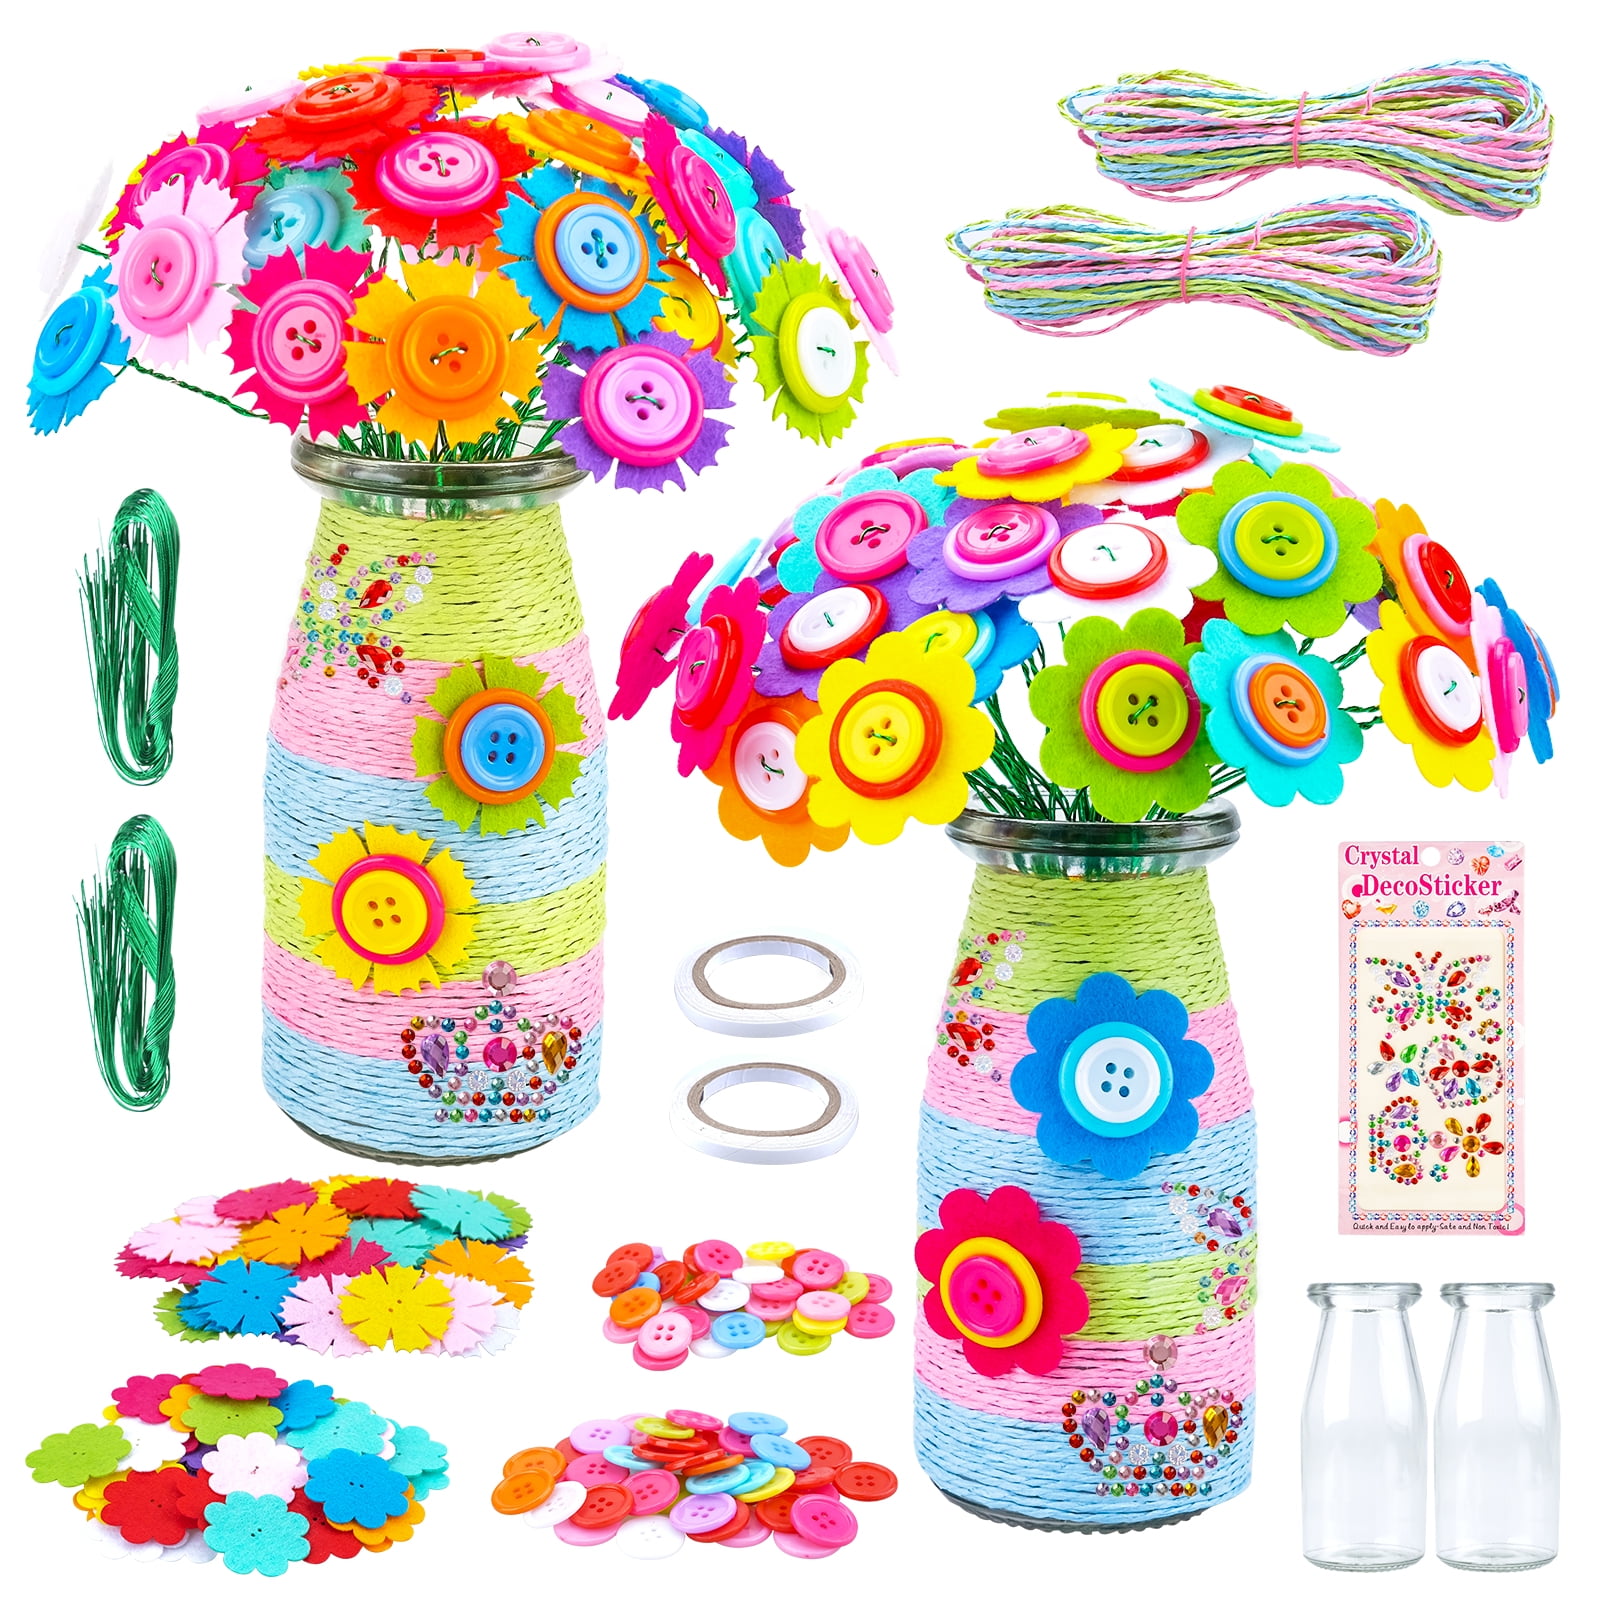 Kids Crafts Gifts for Girls Boys Age 5-12, Arts and Crafts Sets Presents 7 8 9 10 11 Kids Girls DIY Flowers Crafts Kits Toys Gifts for Kids Age 5-12